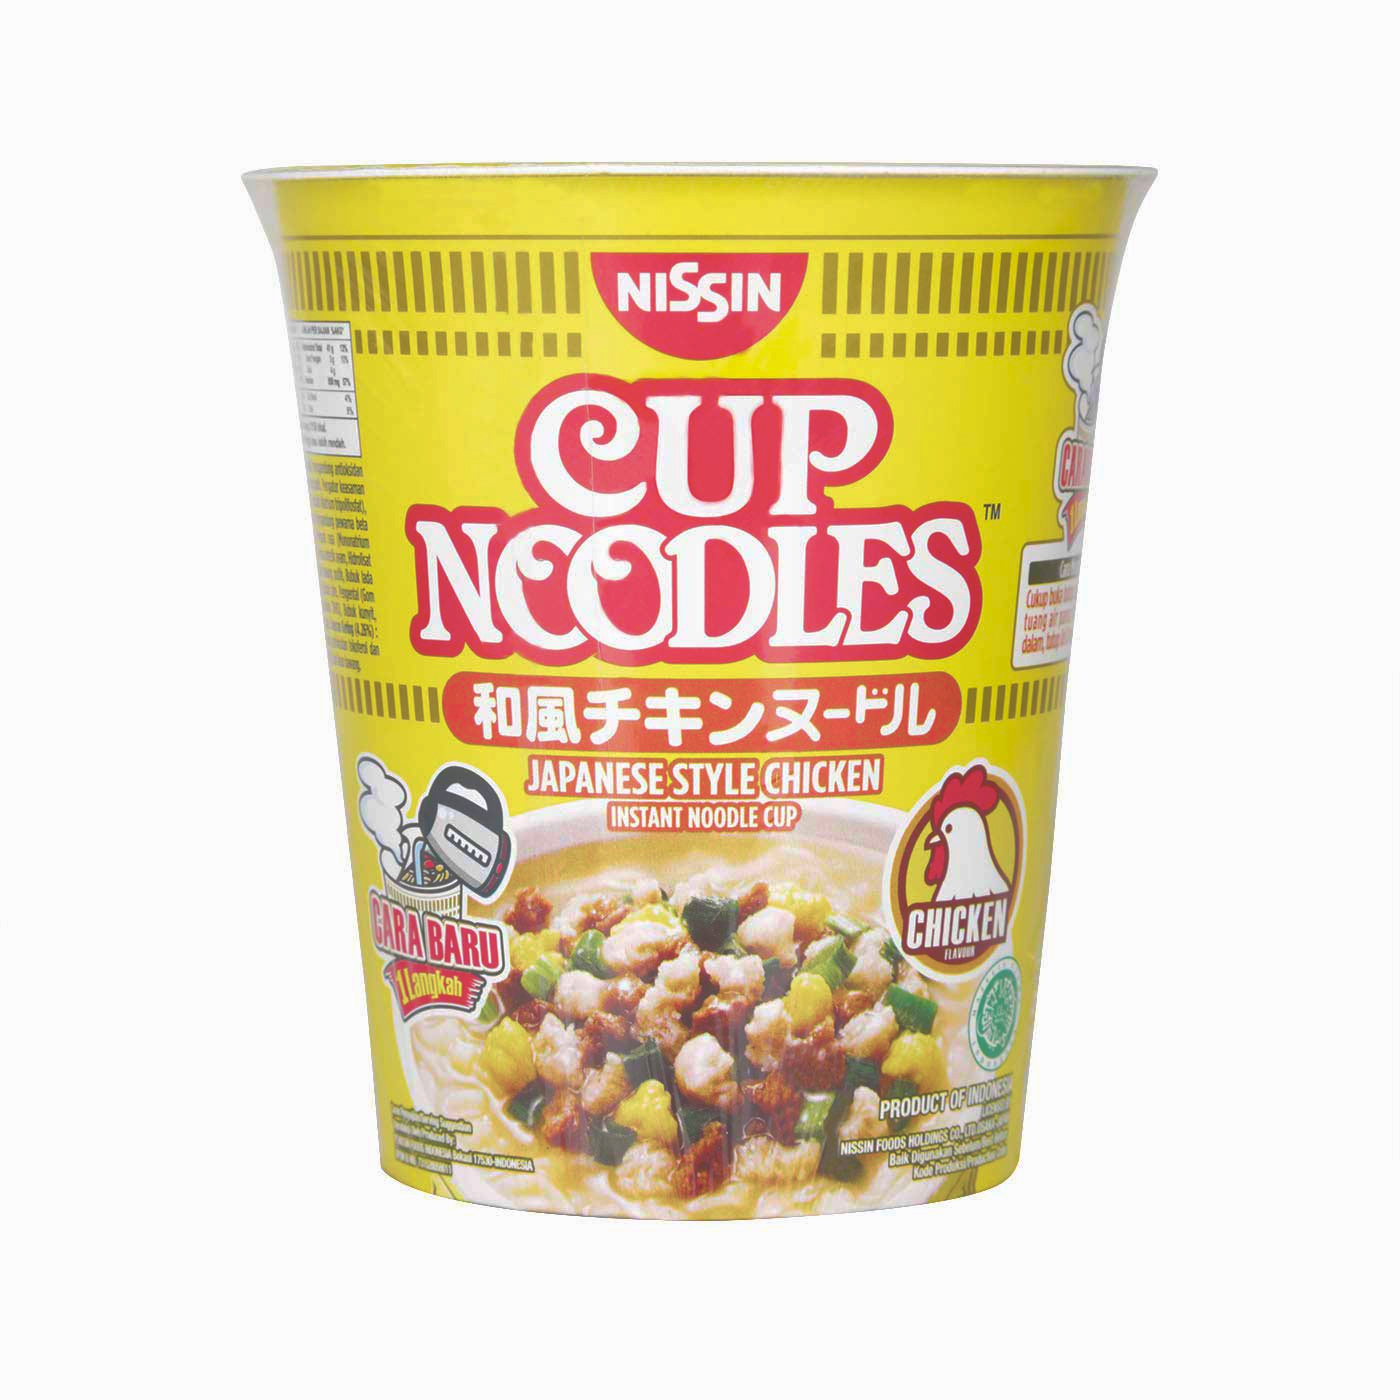 nissin-cup-noodles-yellow-500